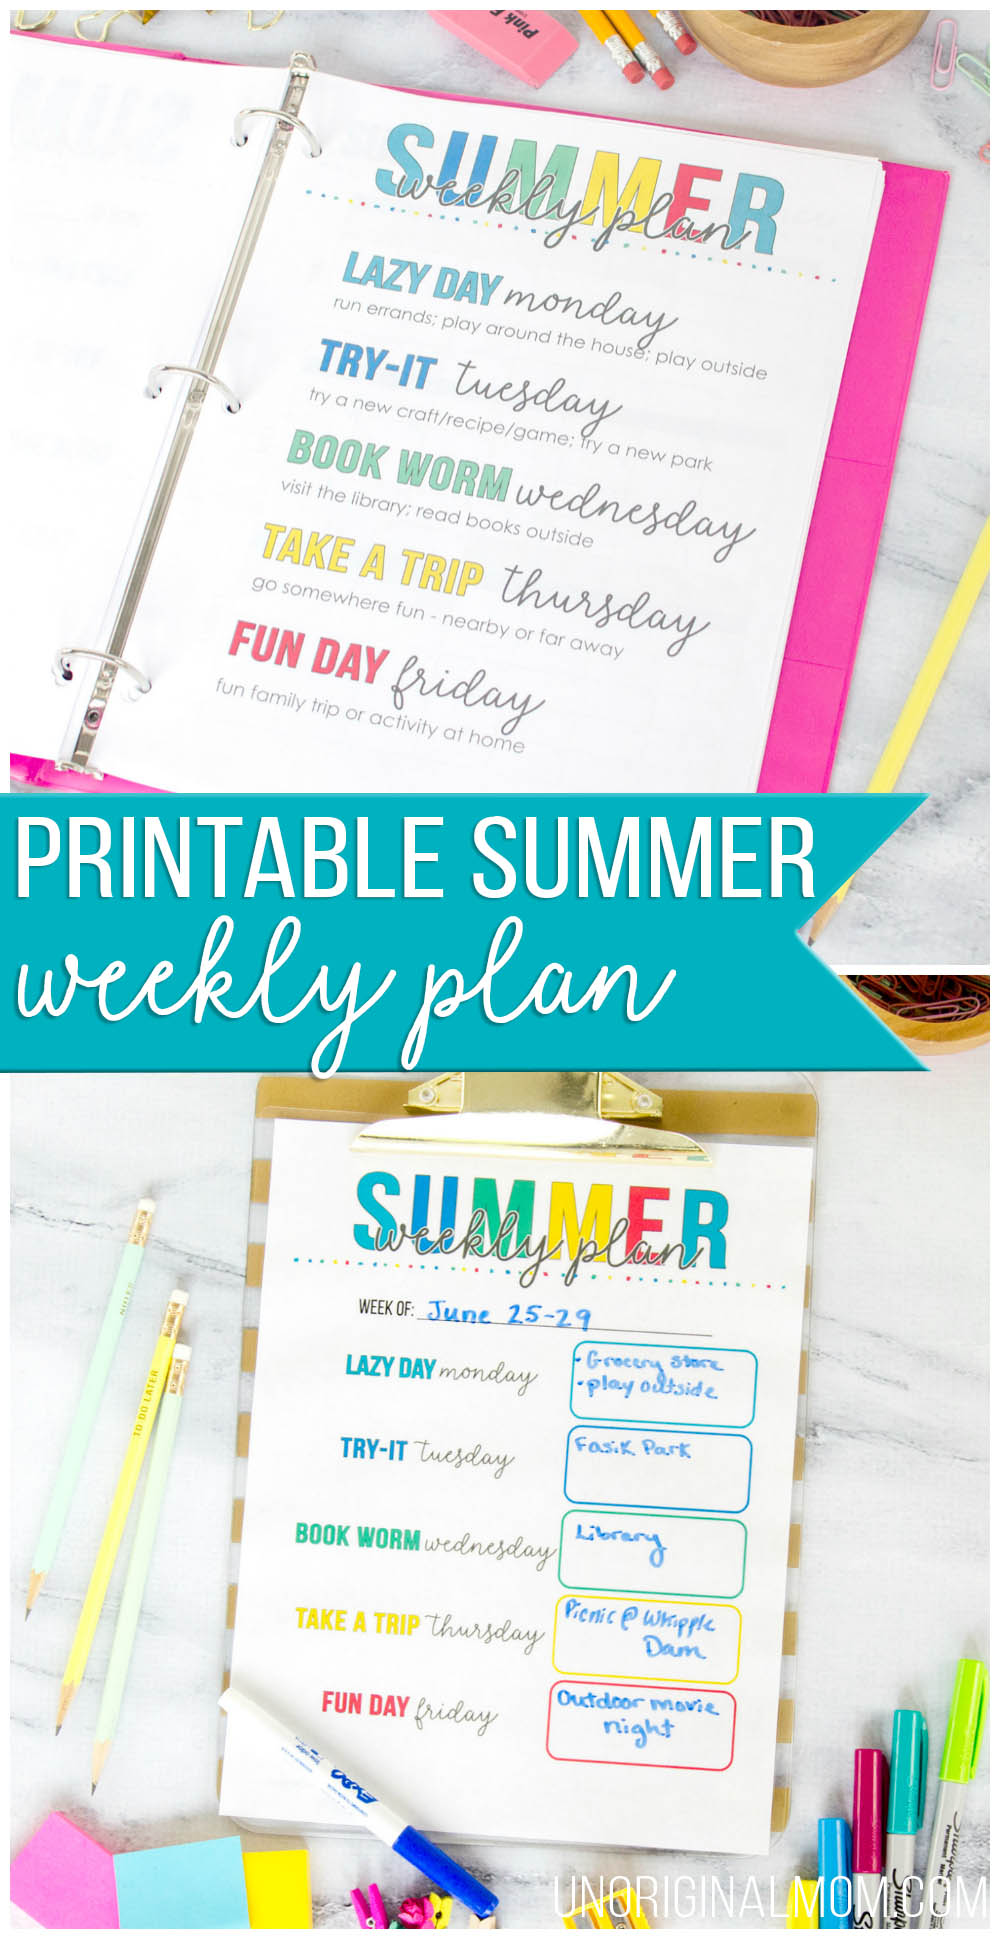 Free printable weekly summer schedule - add some structure and routine to your summer days! #summer #summerplanning #freeprintable